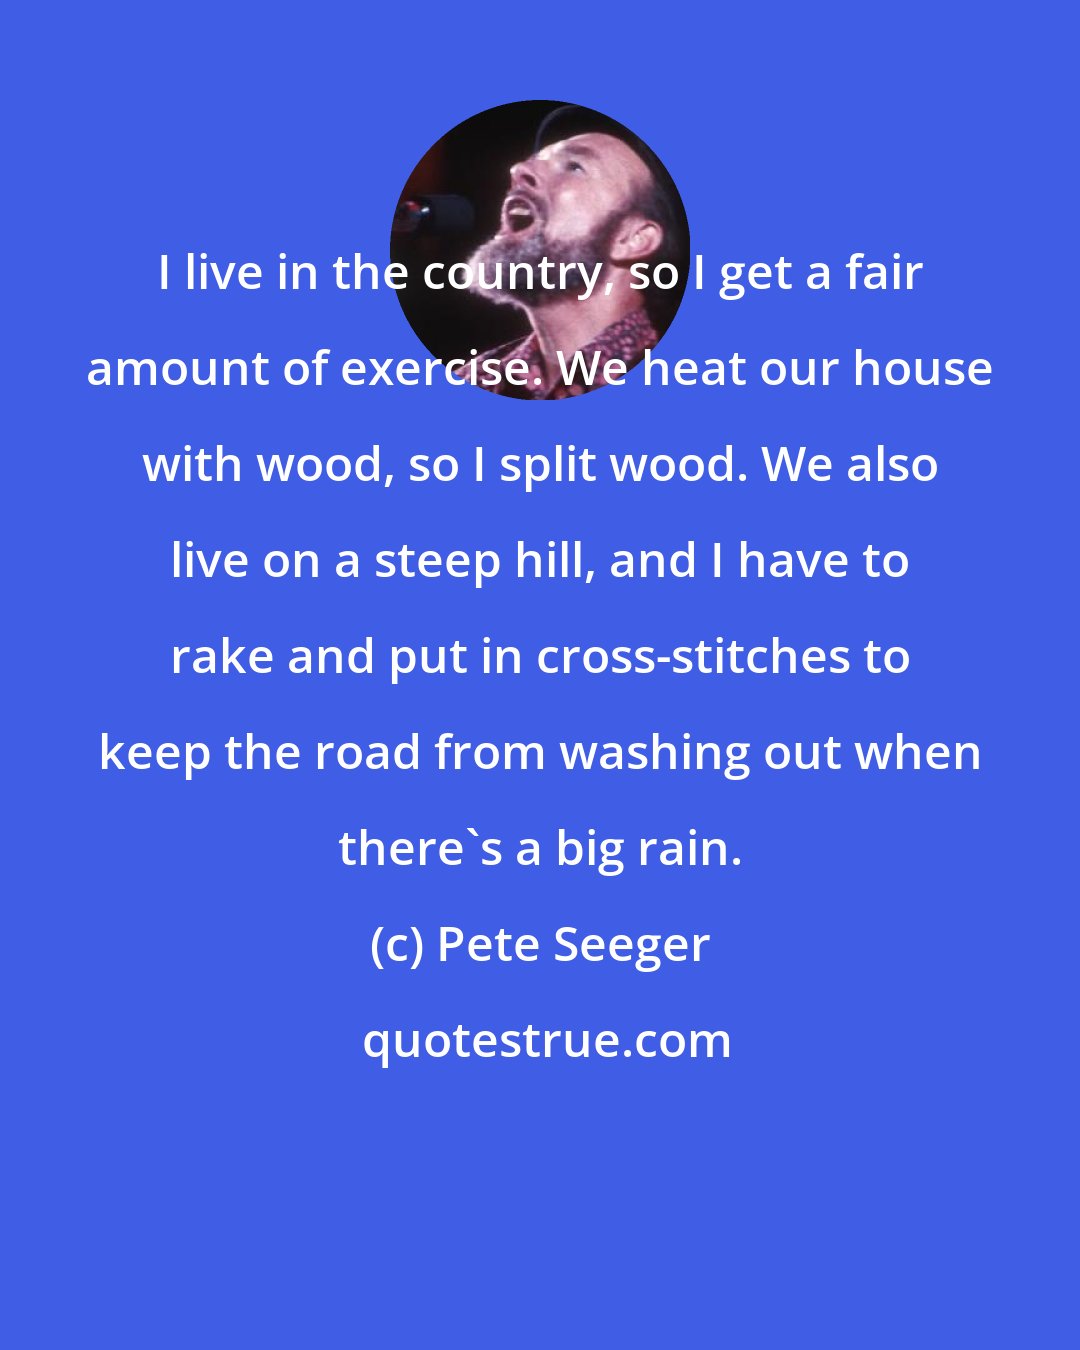 Pete Seeger: I live in the country, so I get a fair amount of exercise. We heat our house with wood, so I split wood. We also live on a steep hill, and I have to rake and put in cross-stitches to keep the road from washing out when there's a big rain.